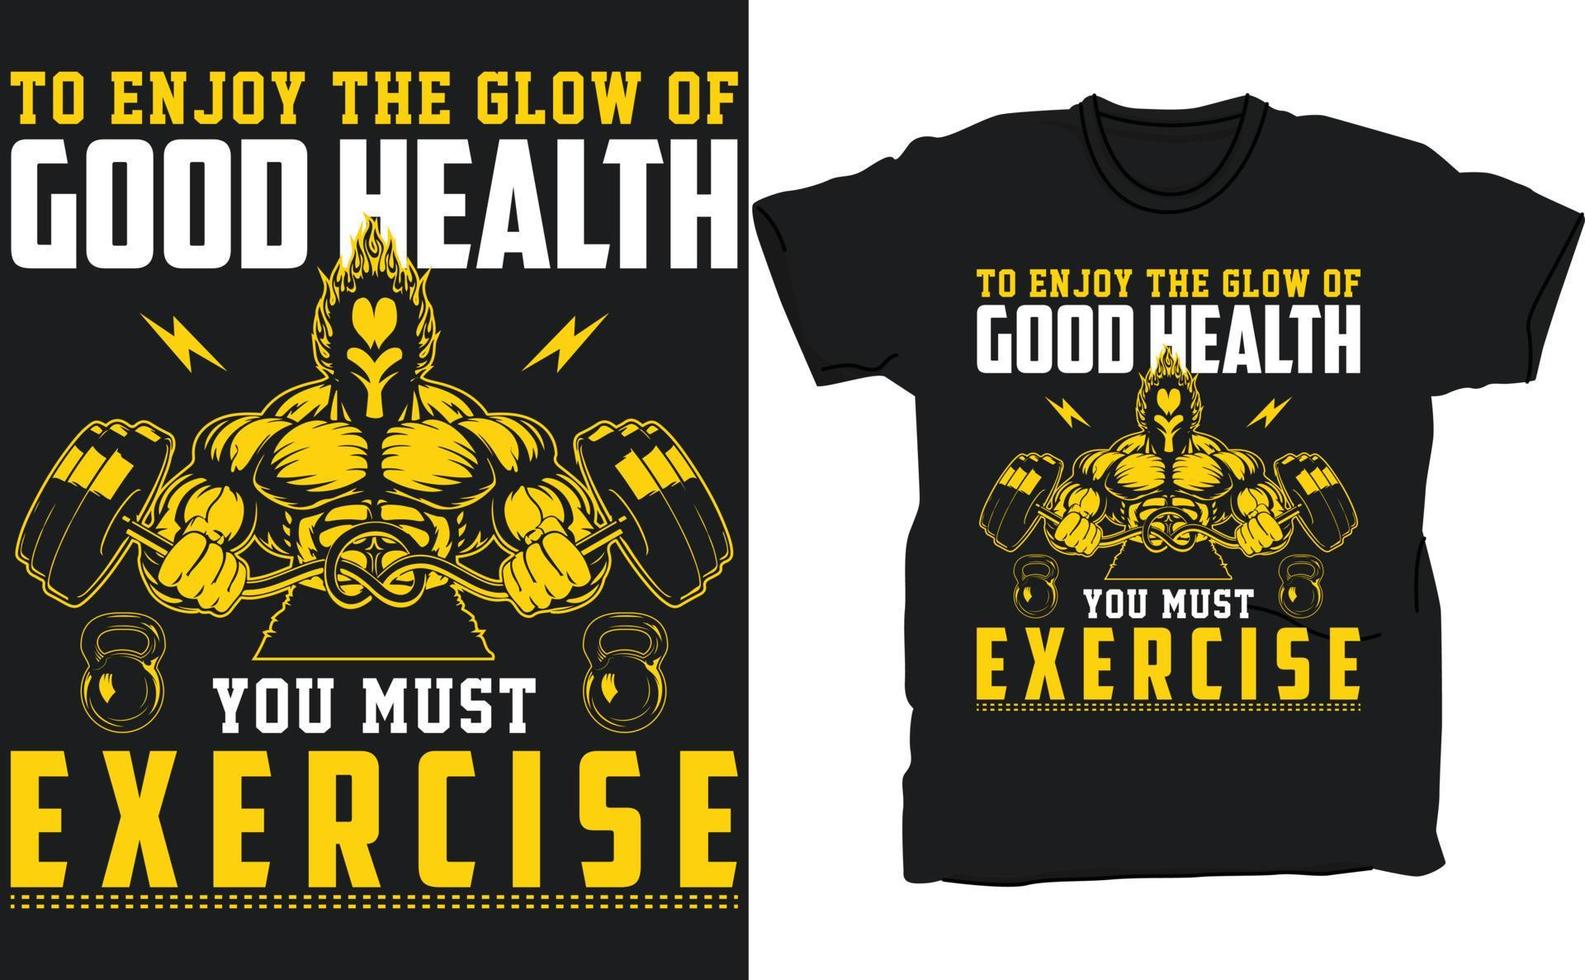 Exclusive Gym t-shirt vector design template.